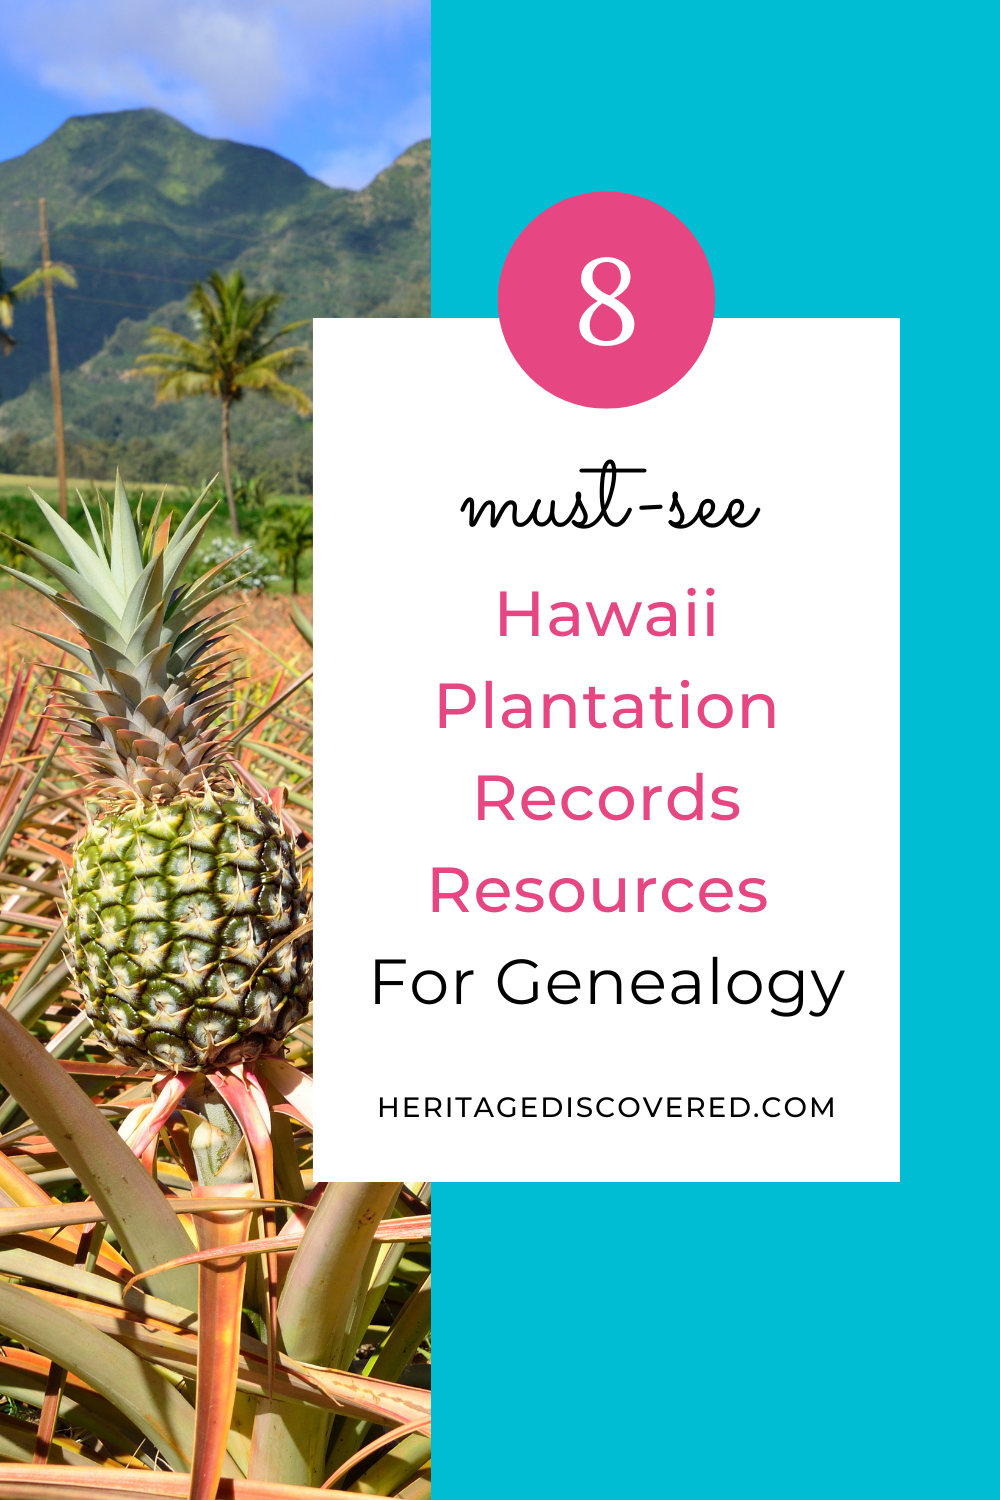 8-must-see-hawaii-plantation-records-resources-for-genealogy